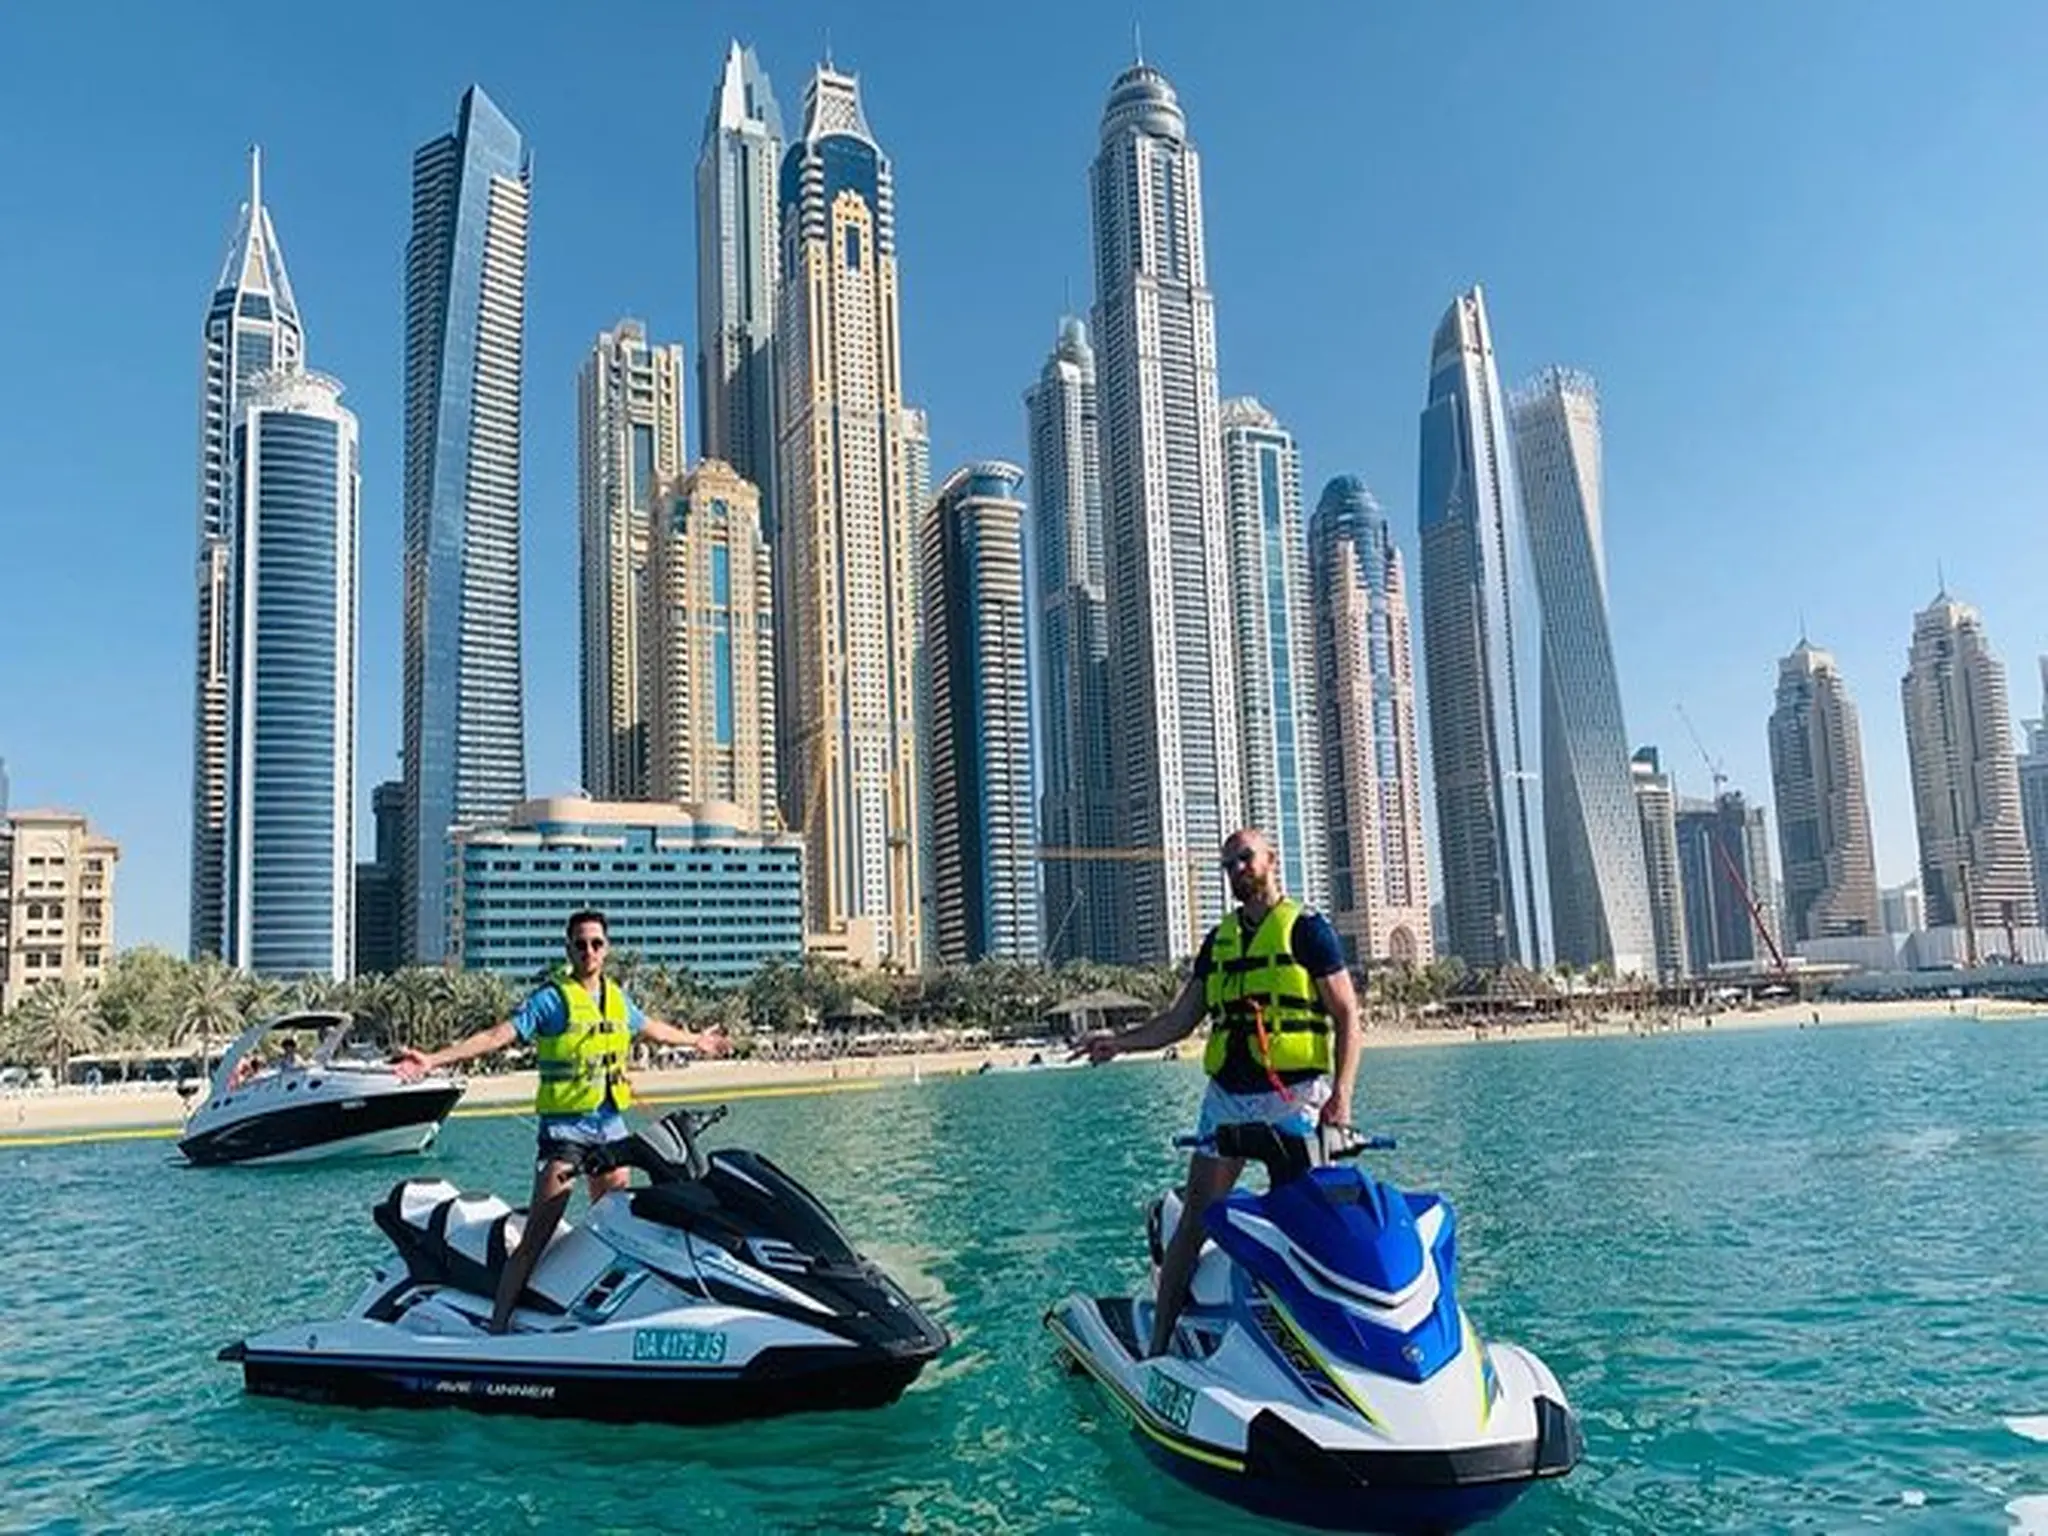 The Emirates announces a decision regarding the rental of jet skis and boats